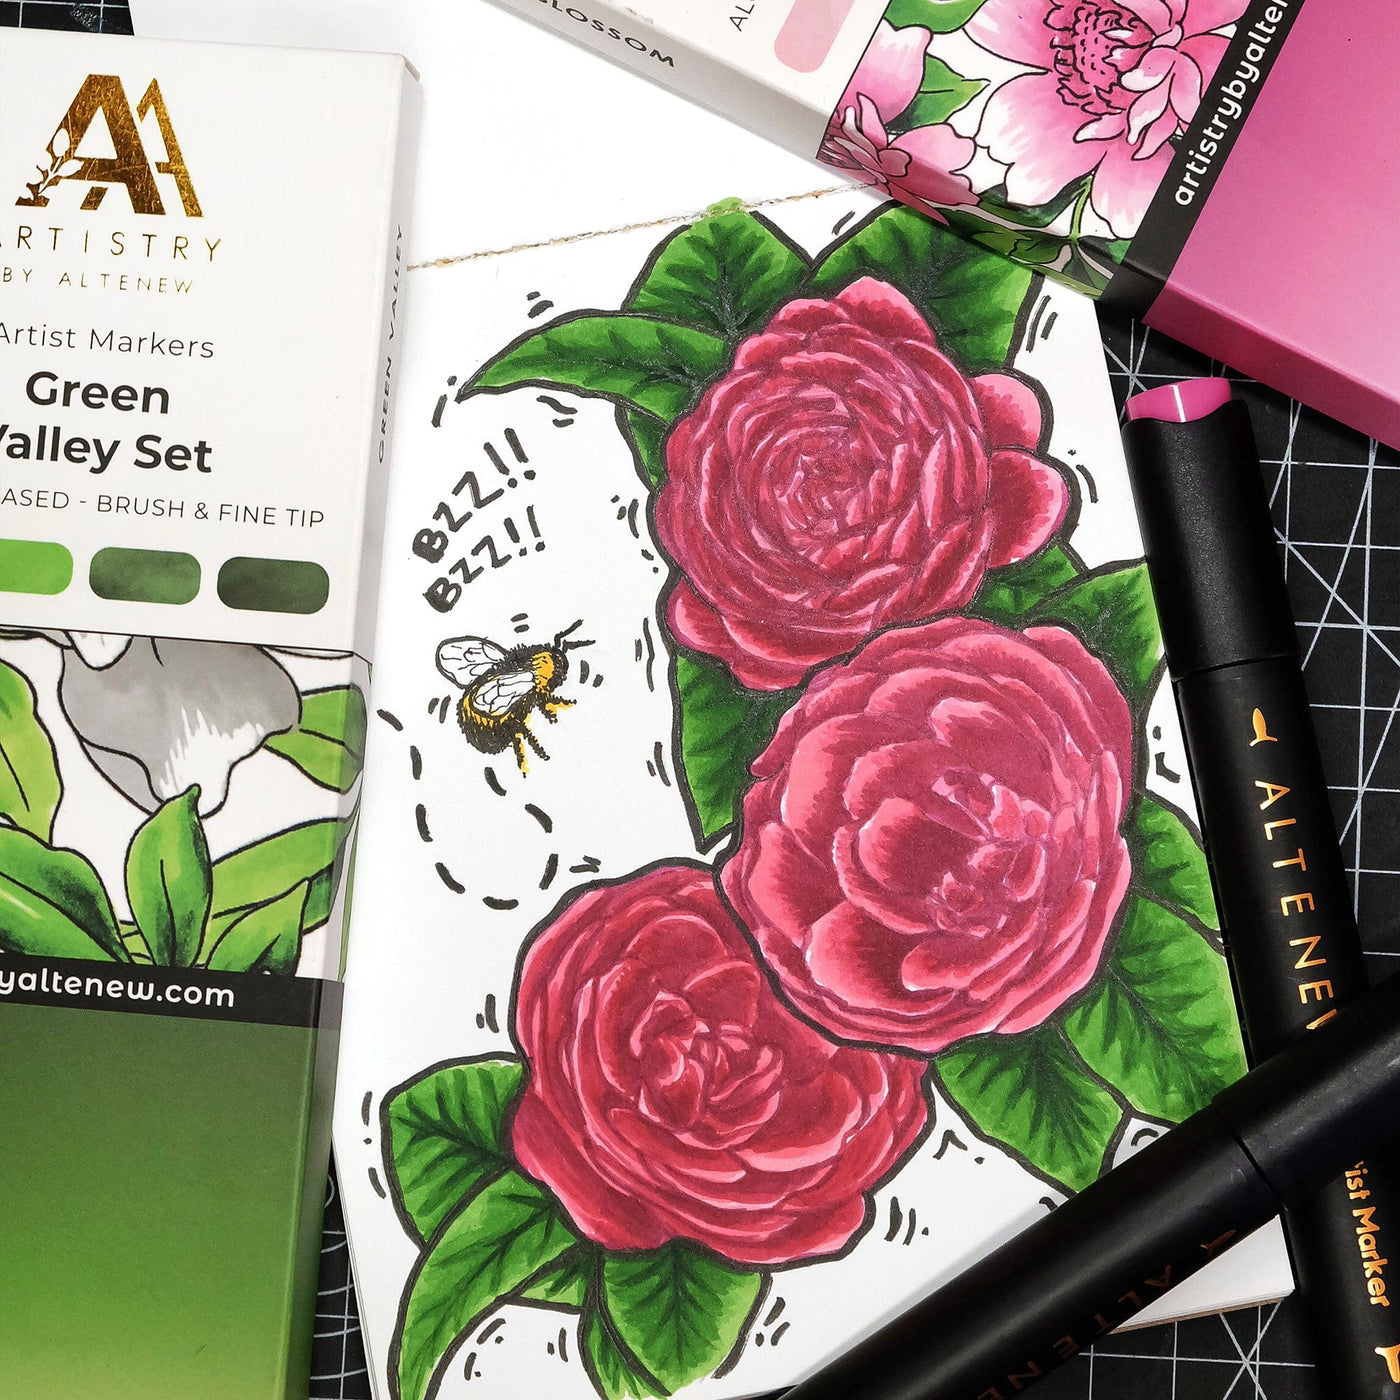 Alcohol Markers Altenew Artist Markers Cherry Blossom Set